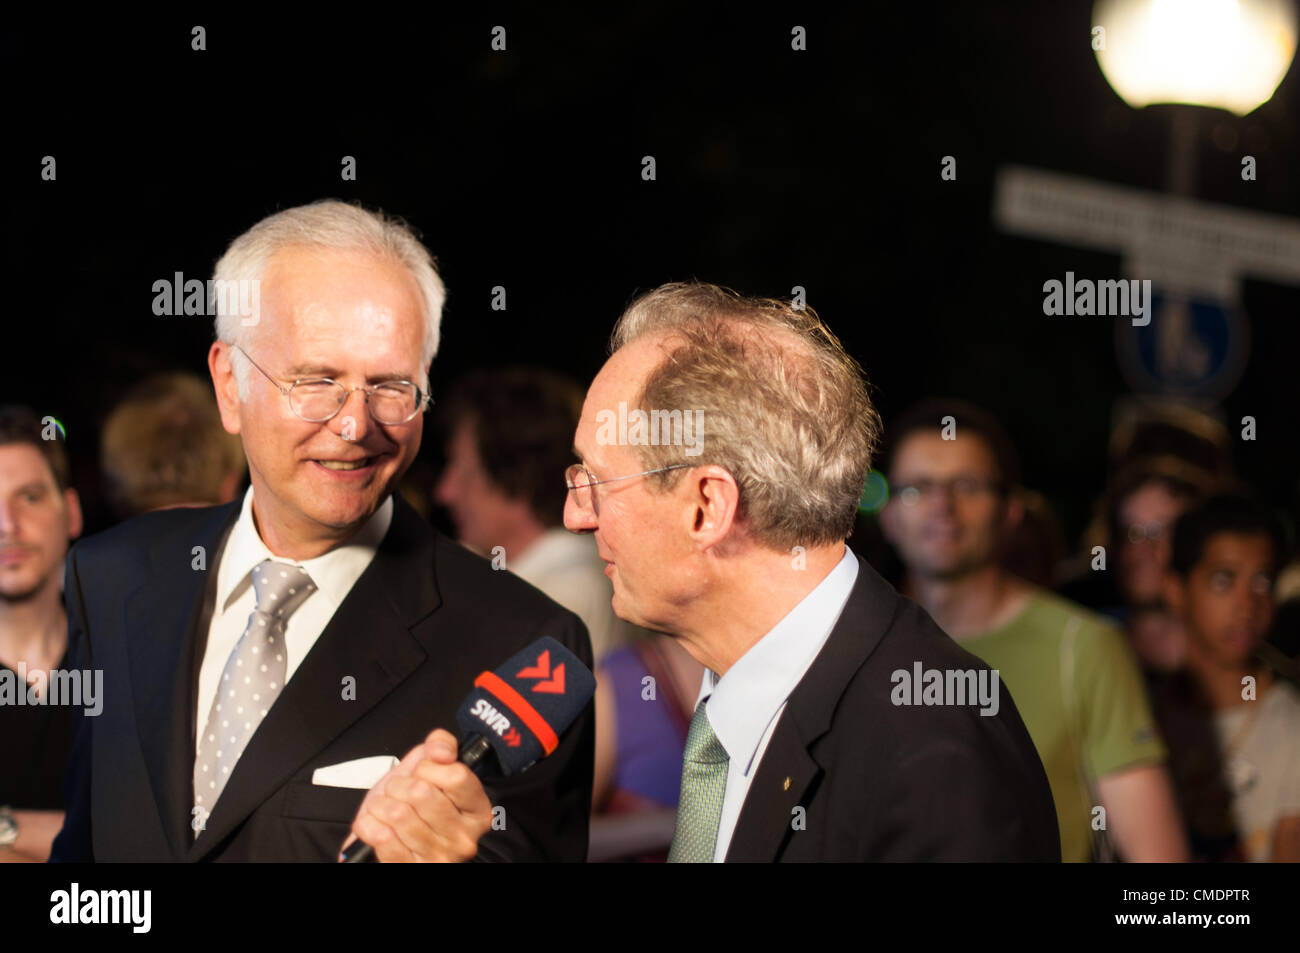 STUTTGART, GERMANY - JULY 25: Harald Schmidt, the most famous German talkmaster, is interviewing Stuttgart Lord Mayor Wolfgang Schuster as a guest at the public viewing of the premiere of Mozart´s opera “Don Giovanni” in front of the Opera building in Stuttgart, Germany on July 25, 2012. Stock Photo